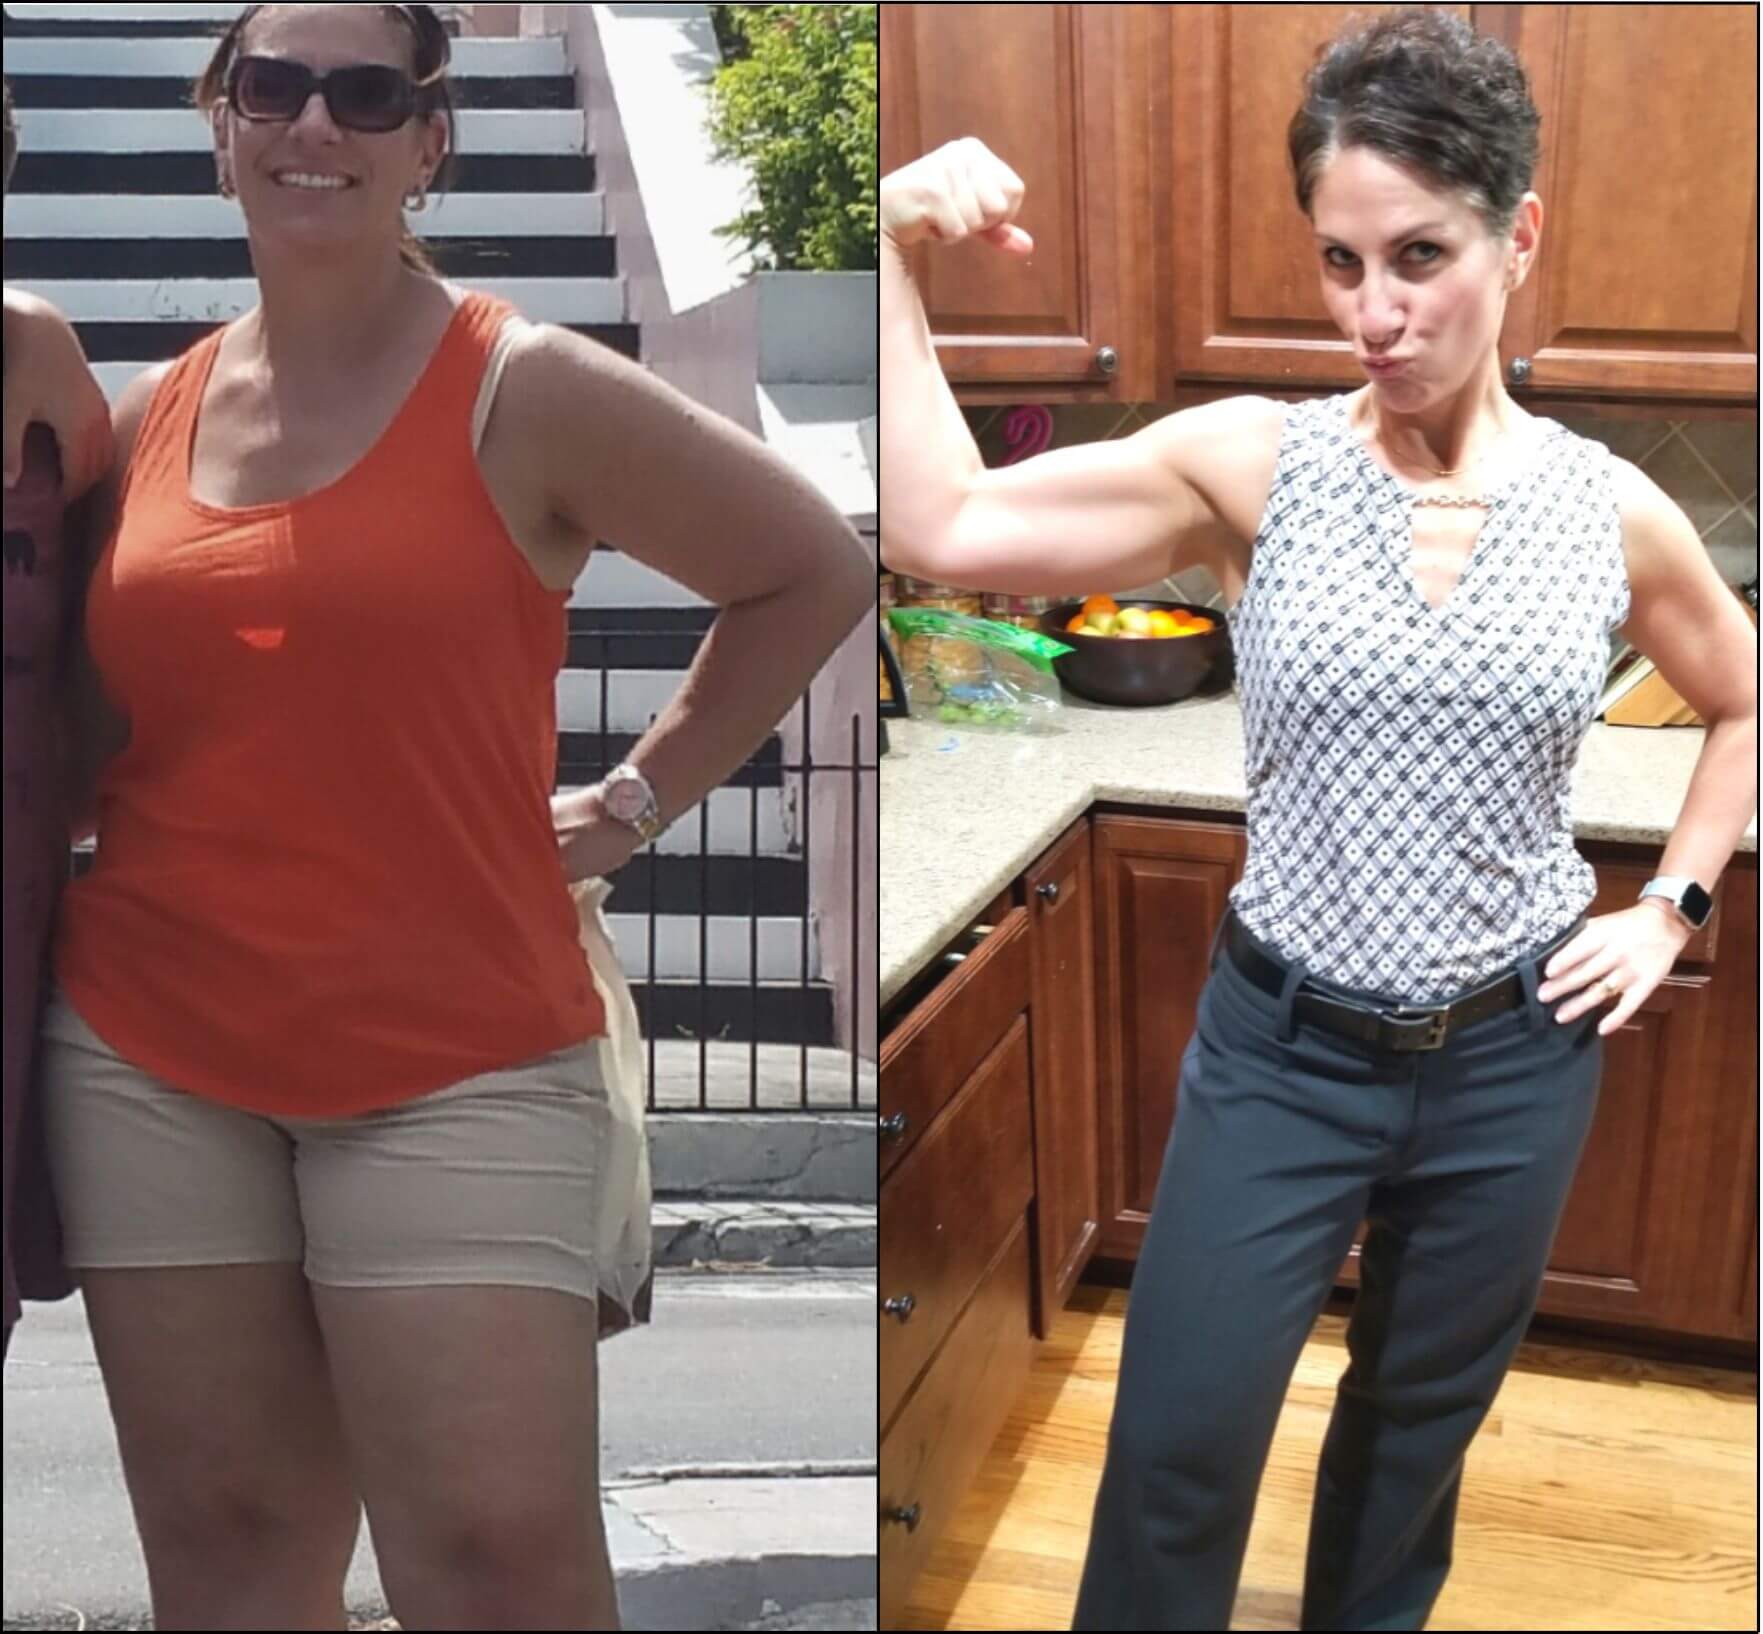 https://www.nobsweightloss.com/wp-content/uploads/2023/10/Stephanie-Two-pictures-of-a-woman-posing-before-and-after-weight-loss.jpg